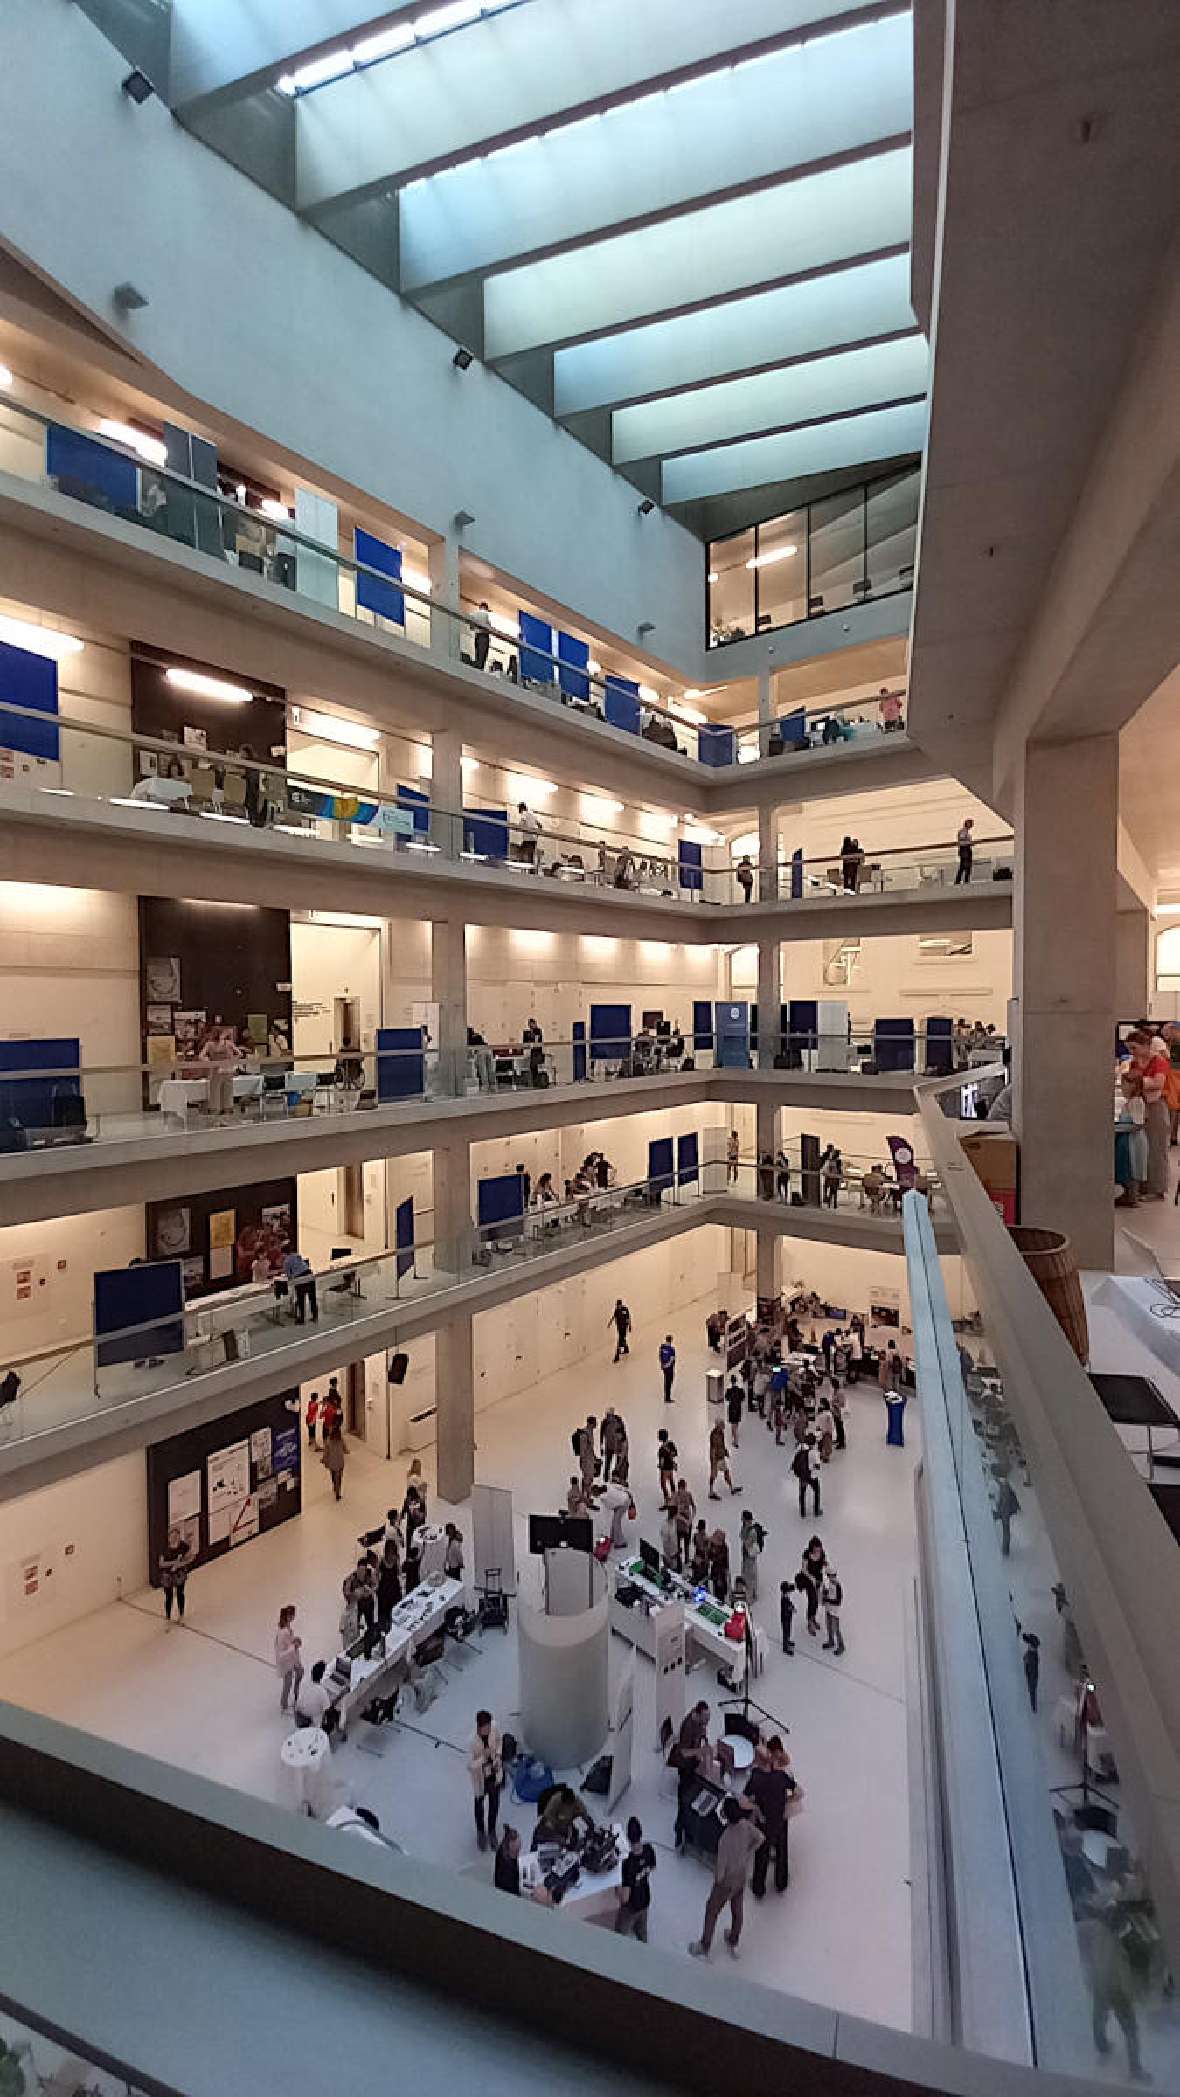 You can see the event space consisting of five levels. An inner courtyard is covered with a glass roof. Corridors run around the inner courtyard. Information booths from many scientific institutions are set up in these corridors. Numerous visitors can be seen around the booths.